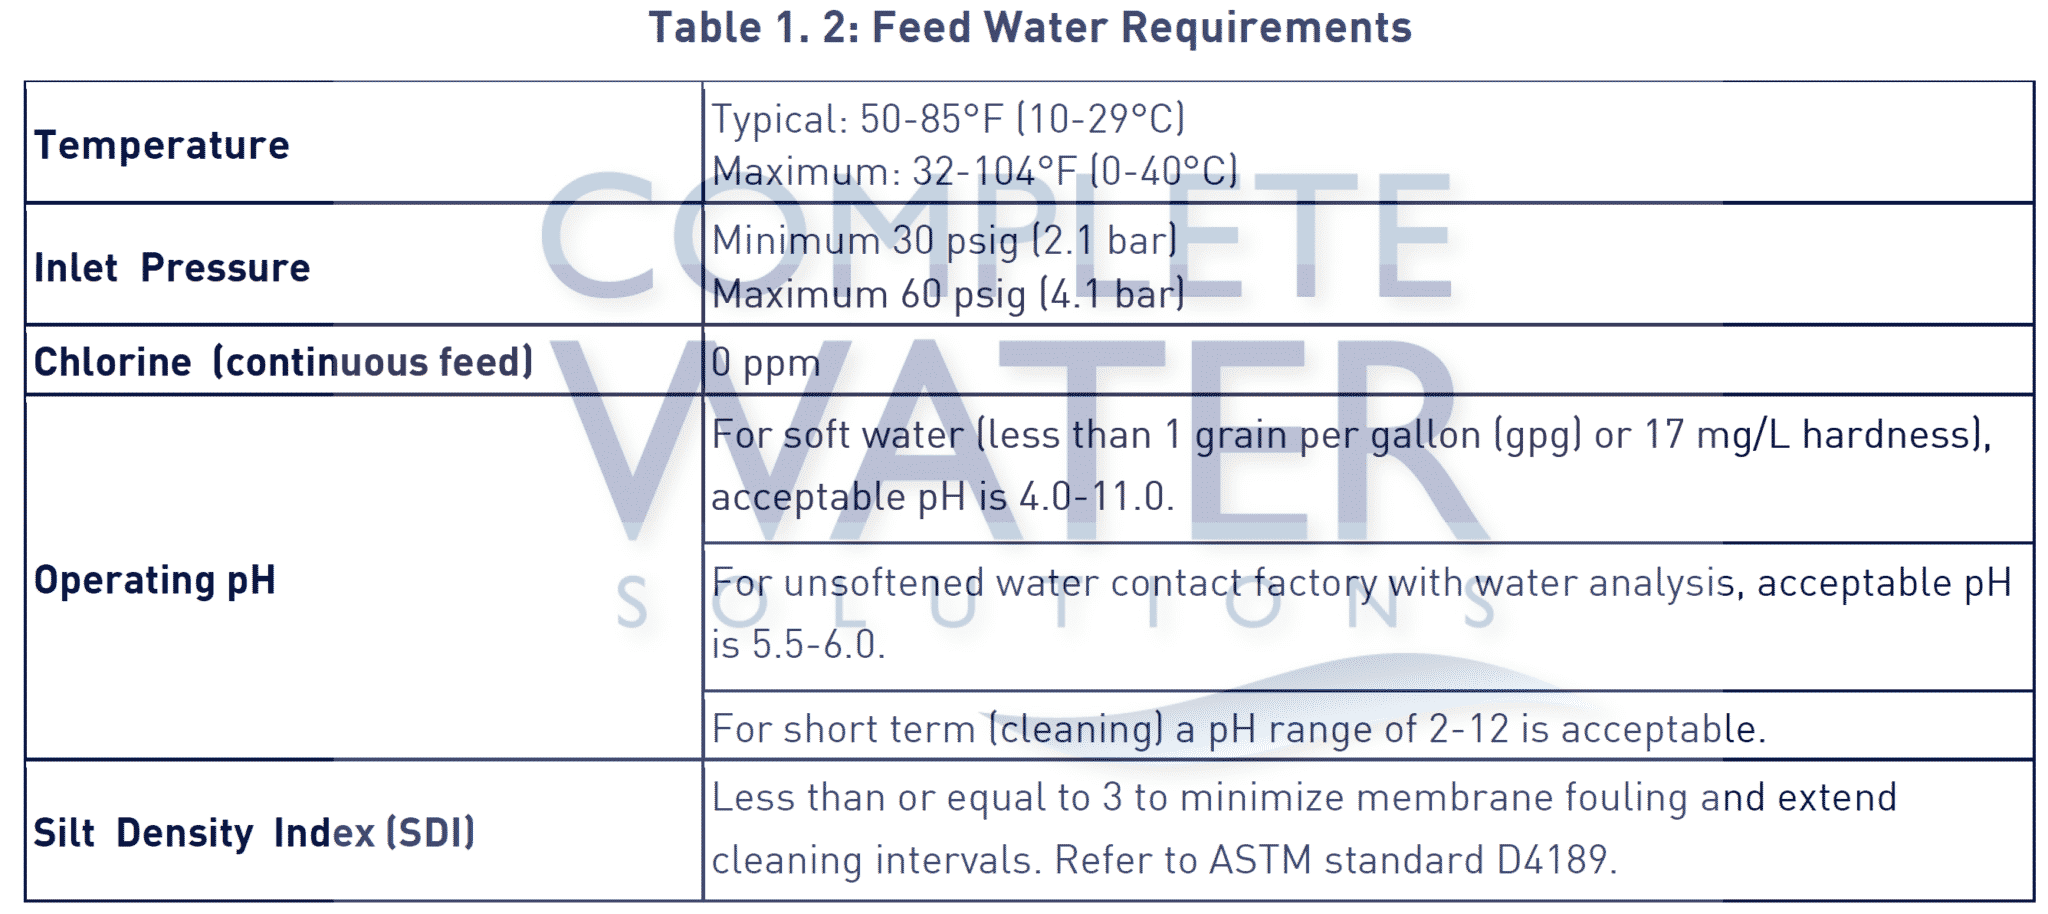 table1.2 feed water requirements